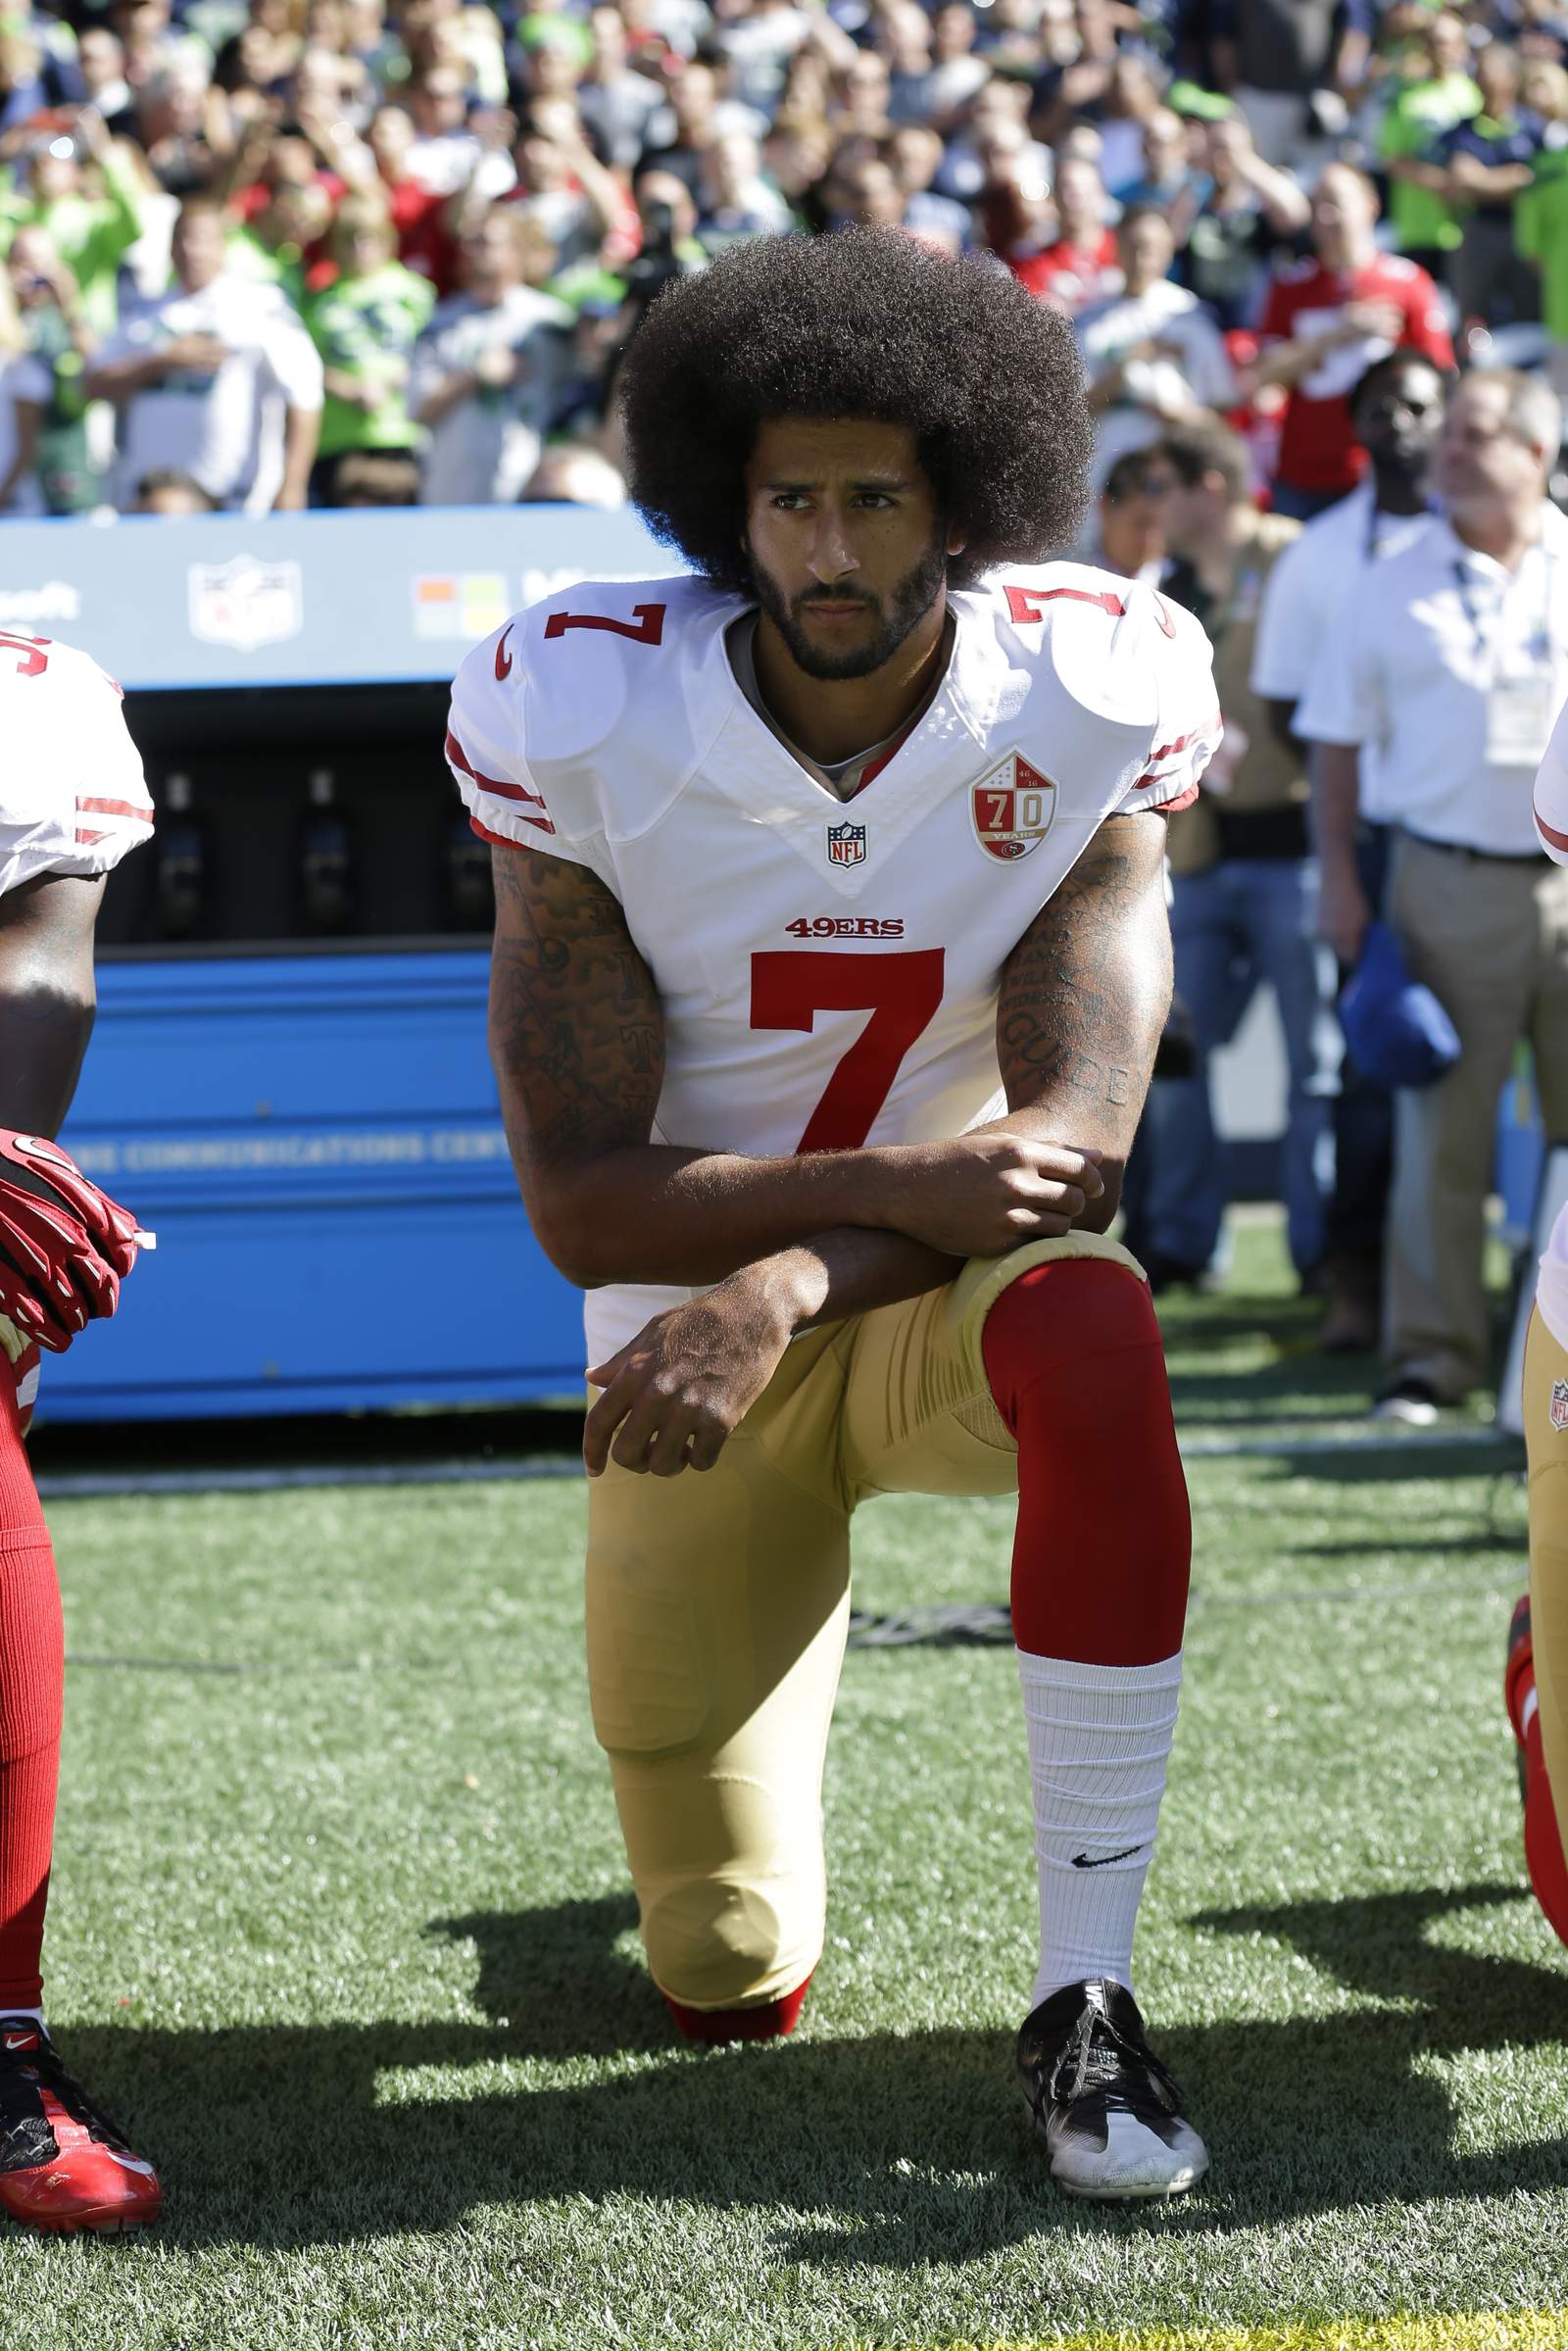 Colin Kaepernick has more support now, still long way to go